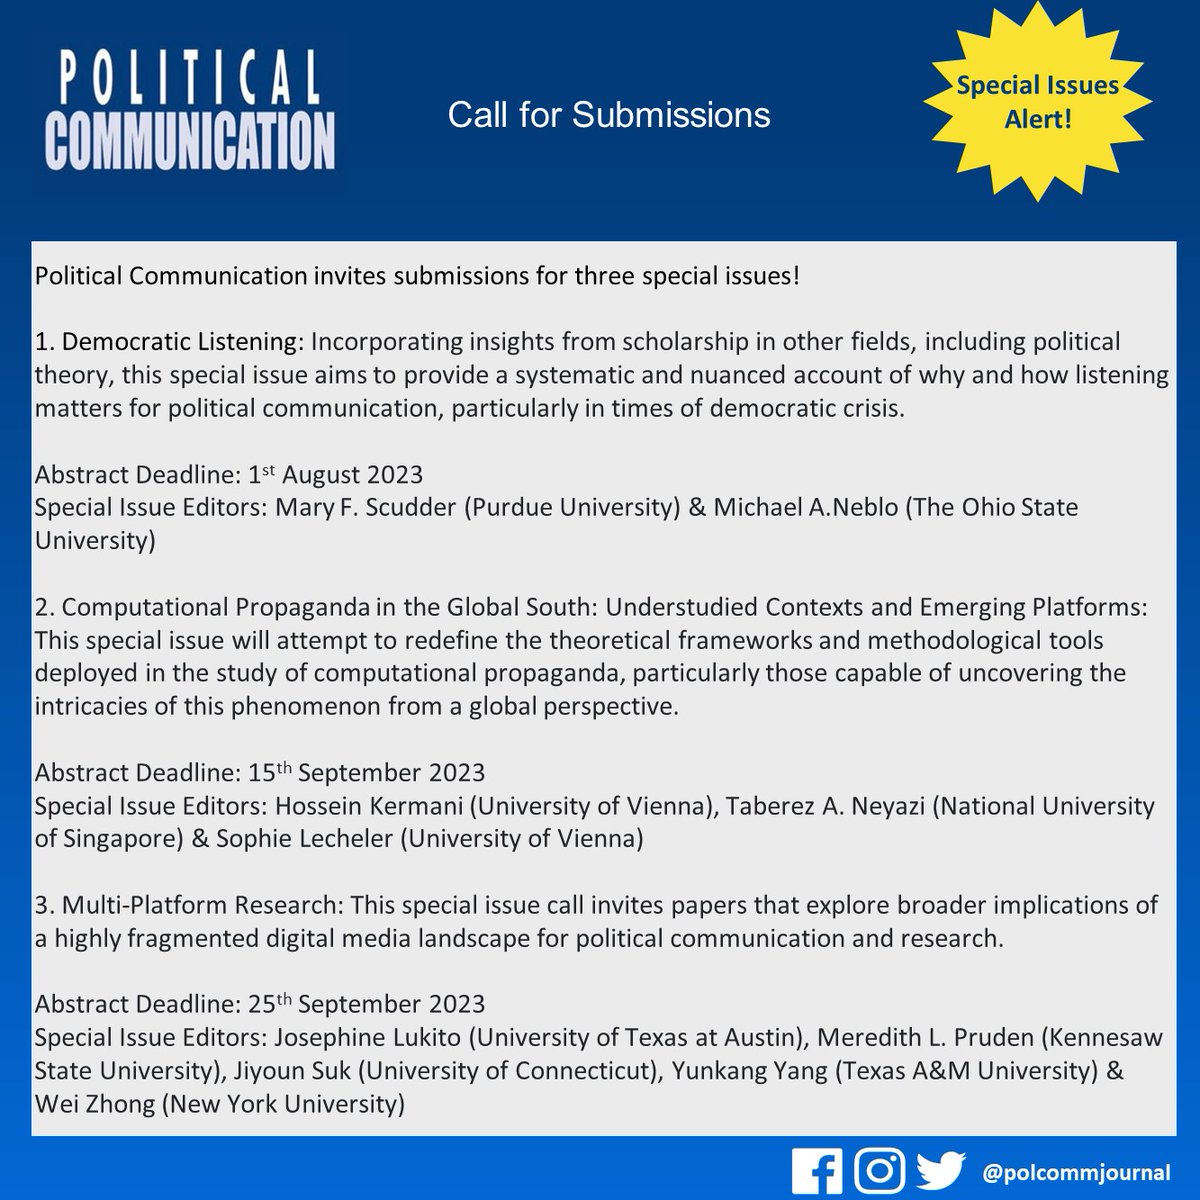 📢 Political Communication invites submissions for 3 special issues! 1. Democratic Listening bit.ly/3qvnraX 2. Computational Propaganda in the Global South bit.ly/3OZIk7t 3. Multi-Platform Research bit.ly/47Gbyzq